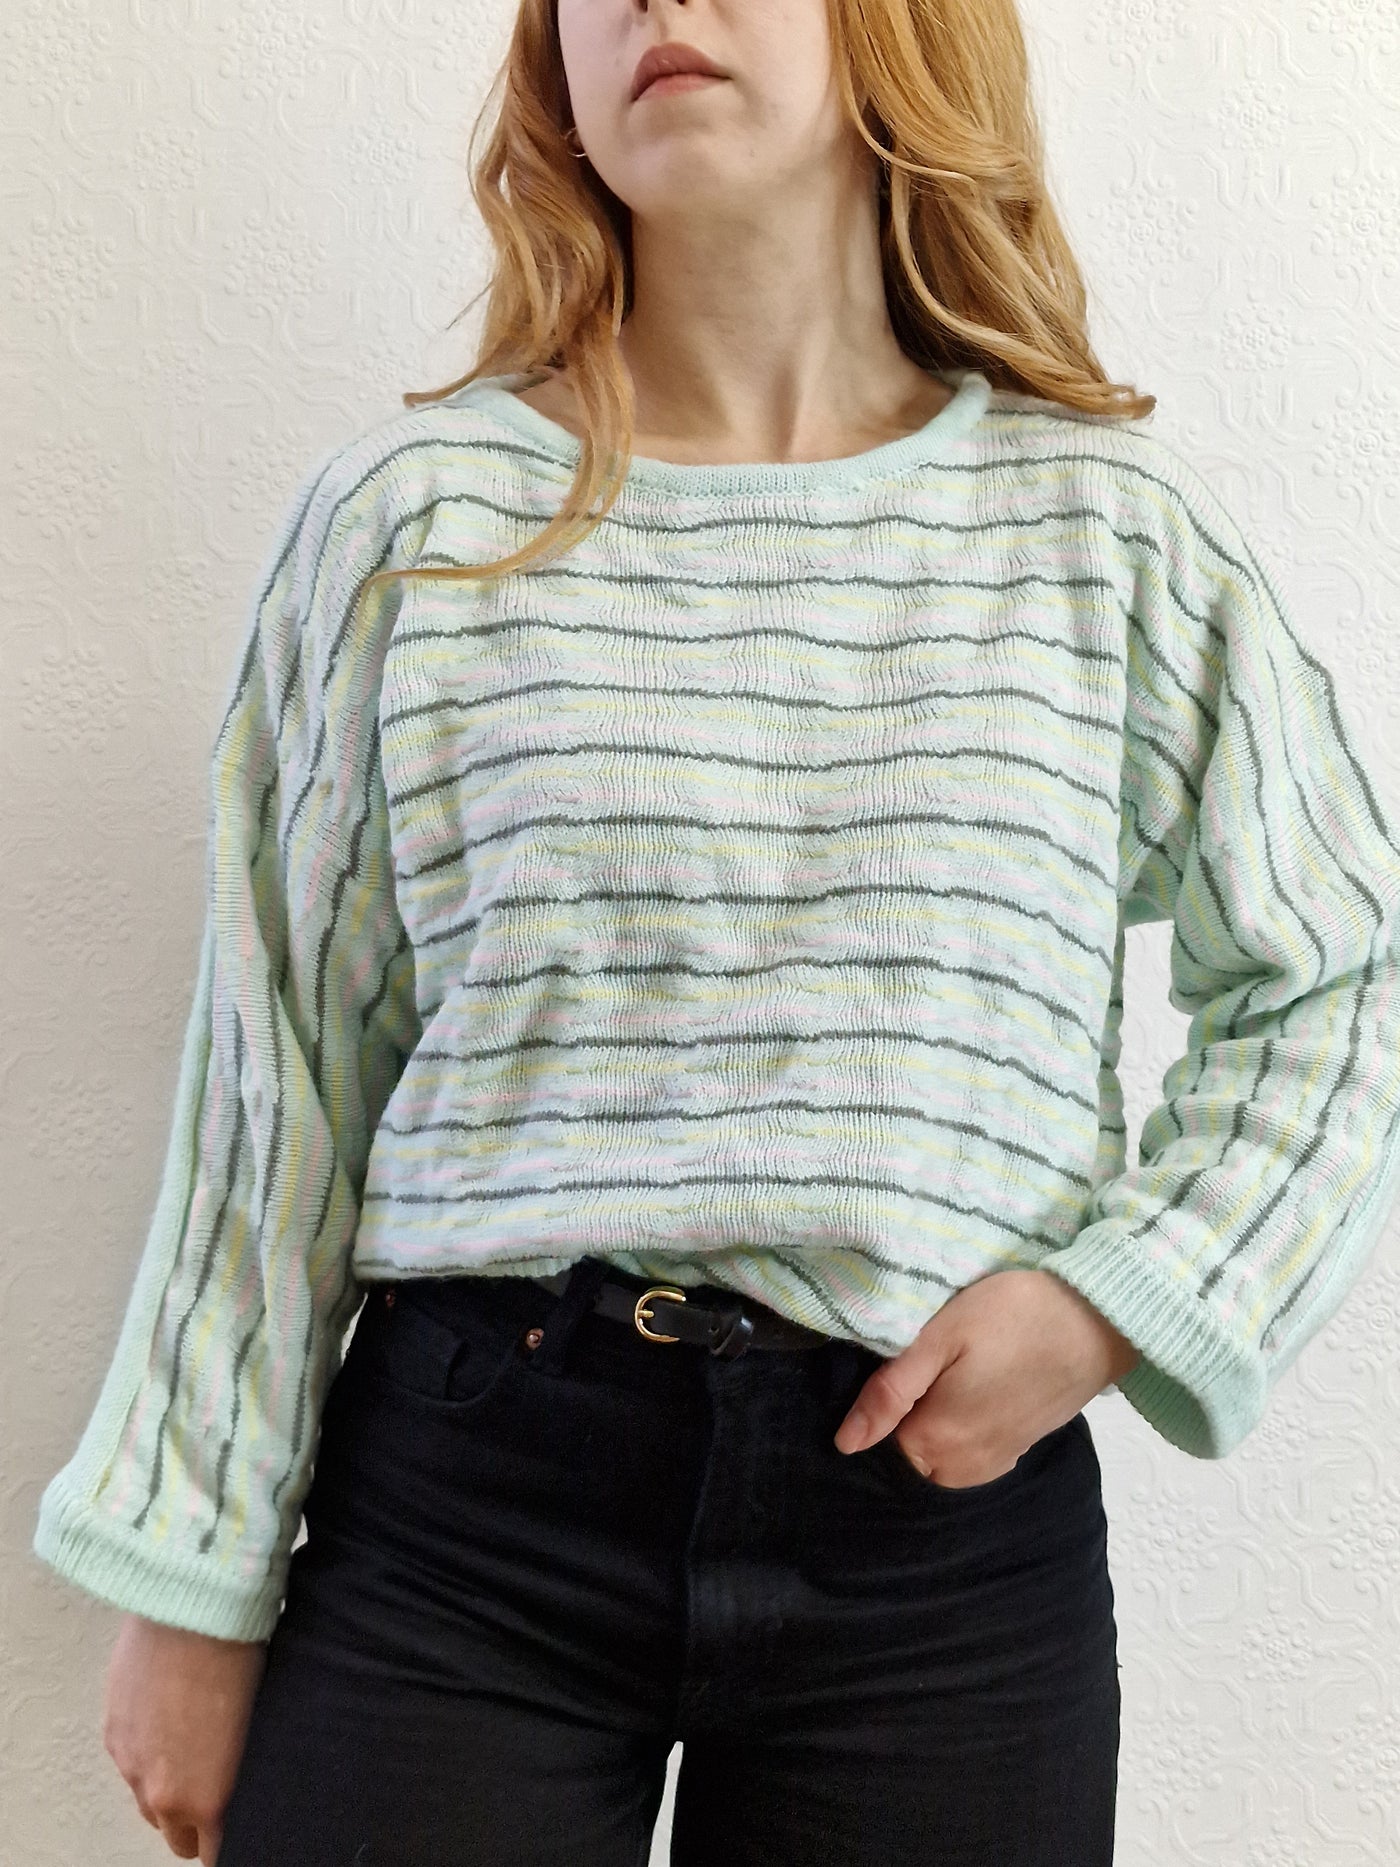 Vintage 70s Mint Striped Textured Jumper with Boat Neck - M